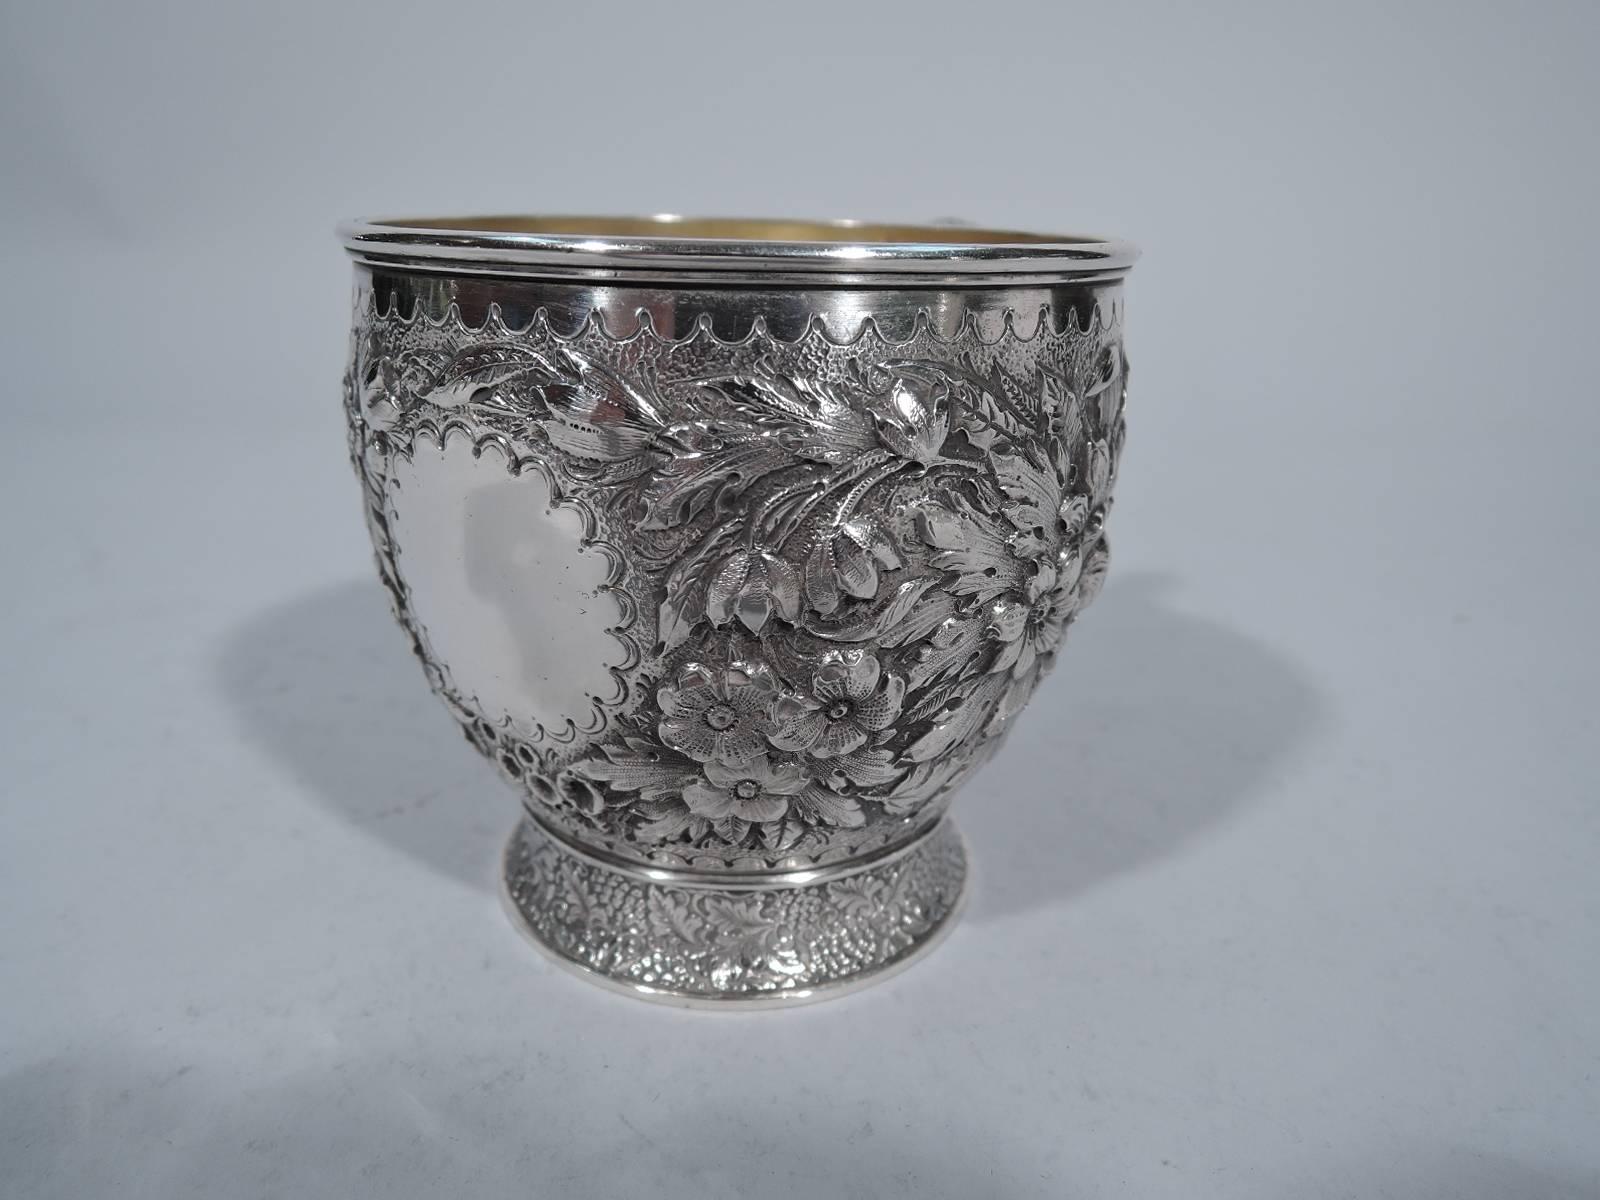 Sterling silver baby cup. Made by Tiffany & Co. in New York, circa 1875. Curved sides, spread foot, and scroll foot. Body has dense and naturalistic floral repoussé on stippled ground, scalloped circular frame (vacant), and more scalloping at top